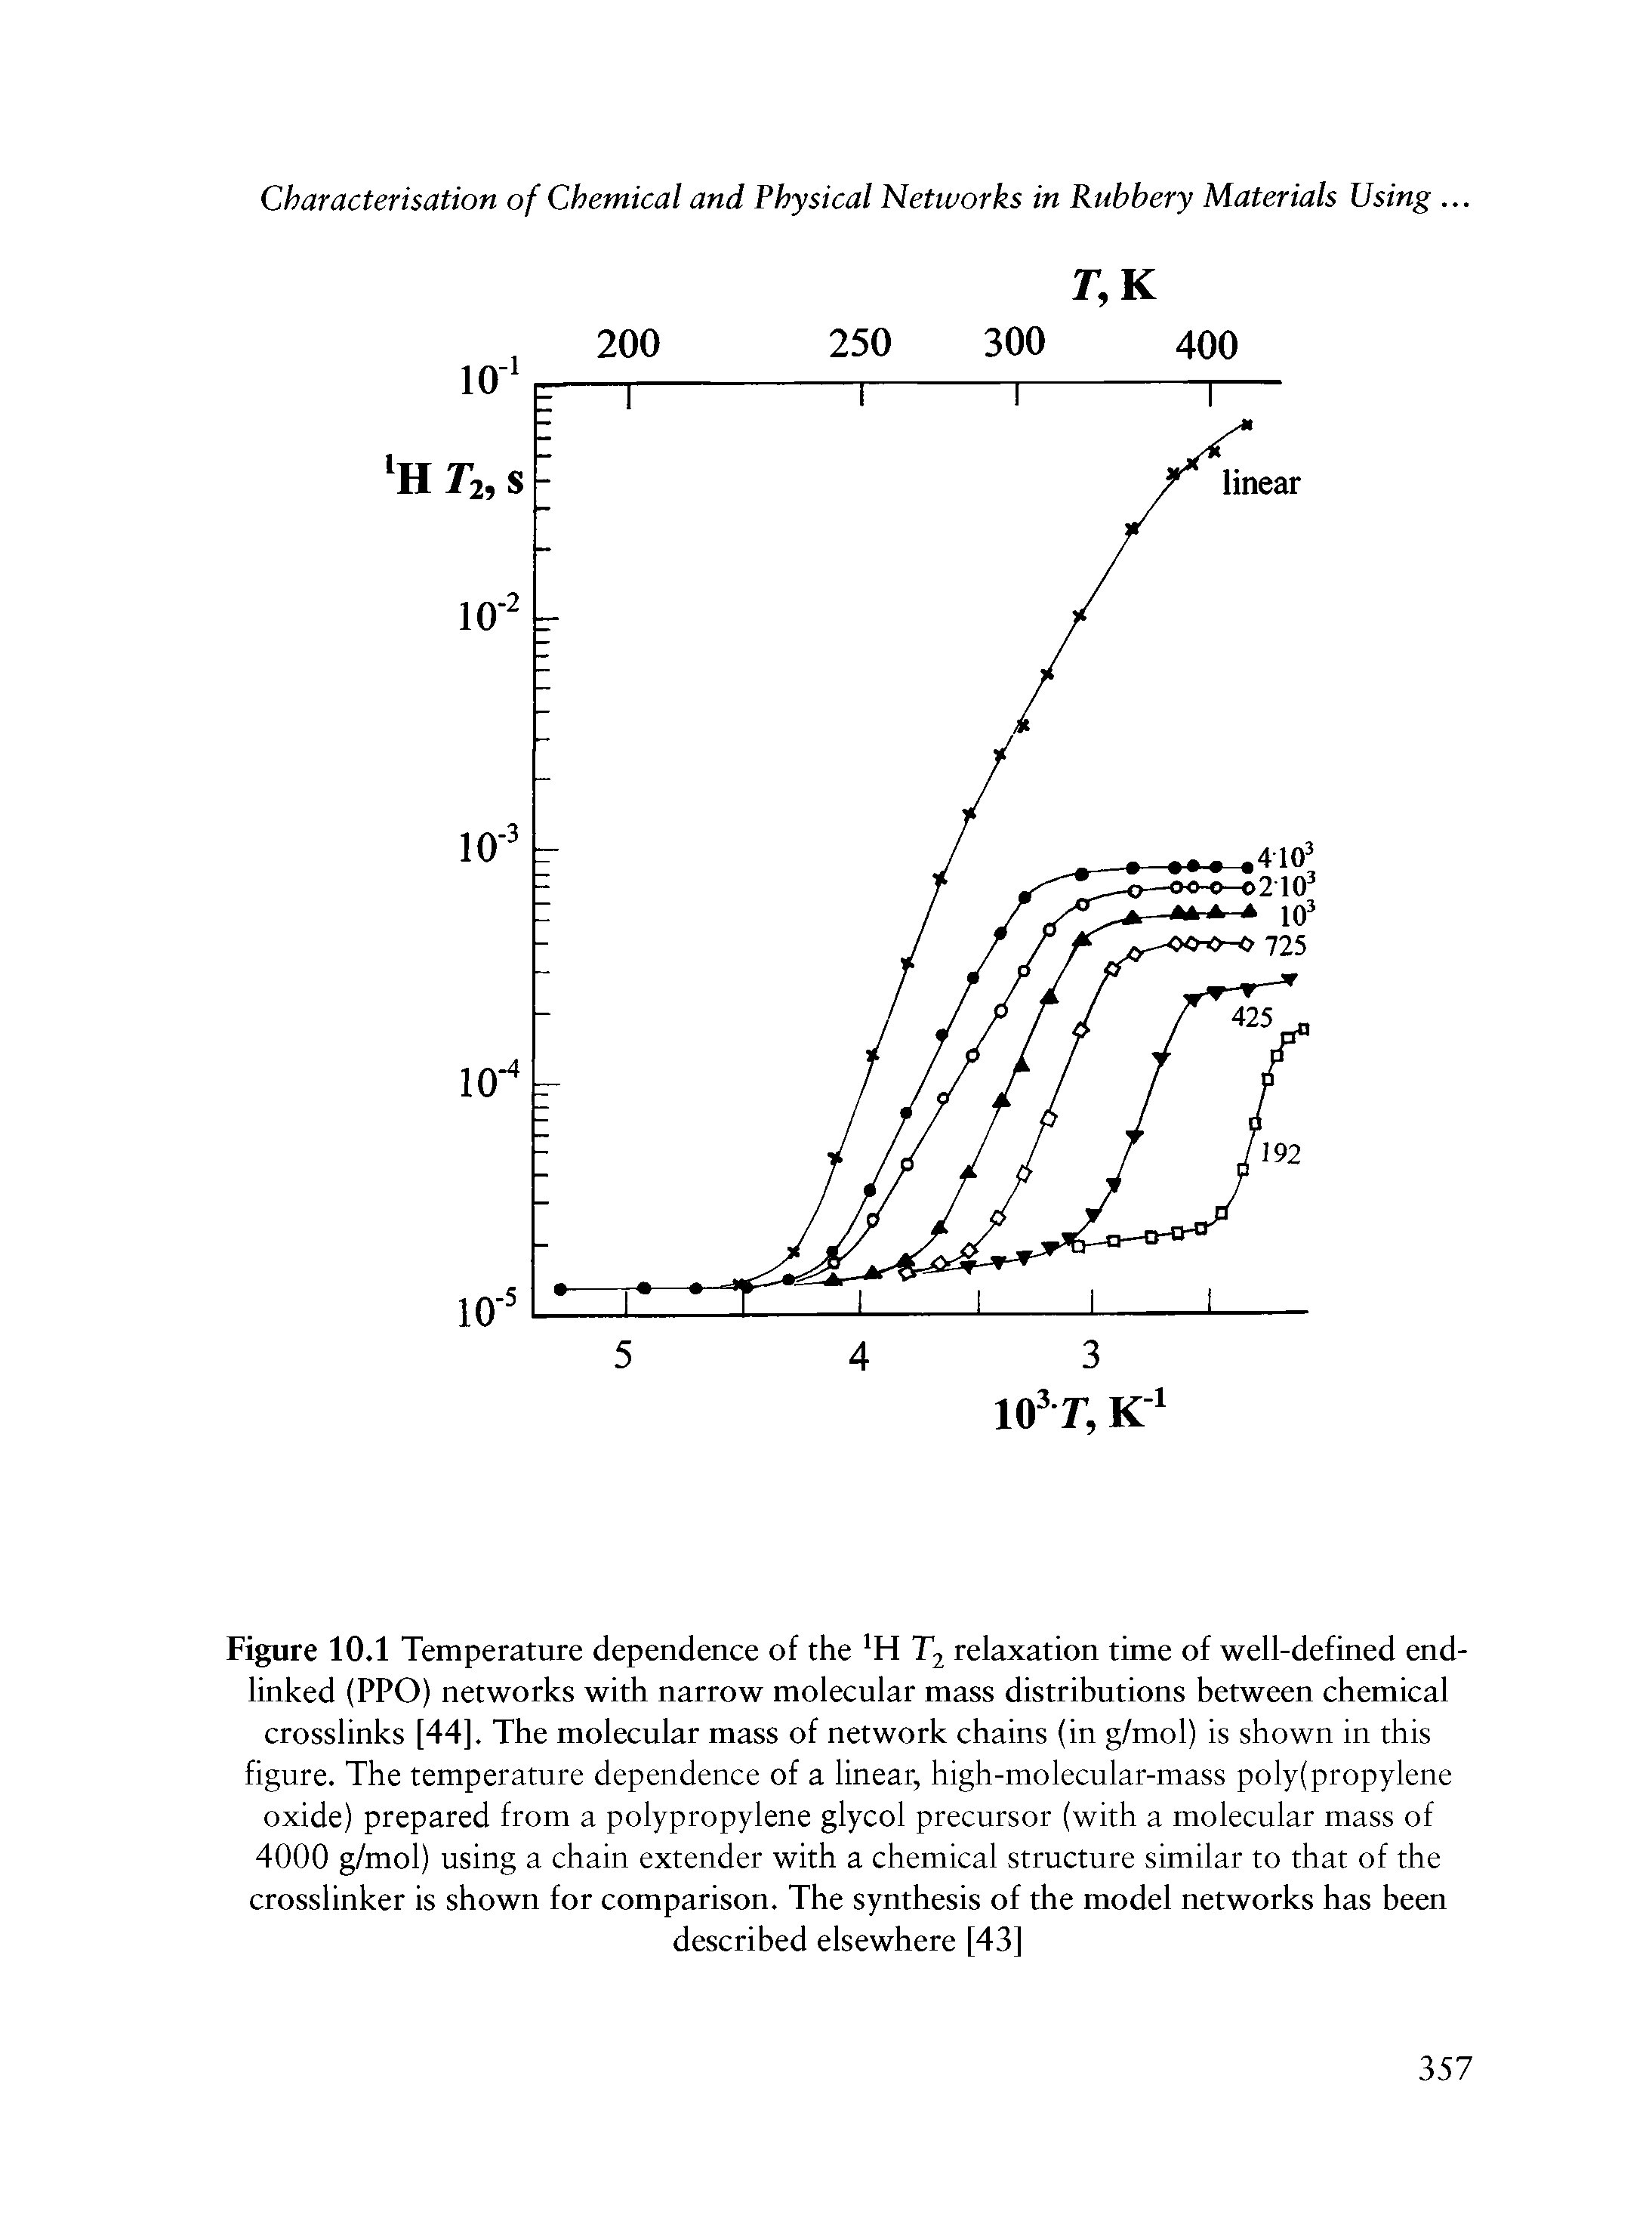 Figure 10.1 Temperature dependence of the H T2 relaxation time of well-defined end-linked (PPO) networks with narrow molecular mass distributions between chemical crosslinks [44], The molecular mass of network chains (in g/mol) is shown in this figure. The temperature dependence of a linear, high-molecular-mass polypropylene oxide) prepared from a polypropylene glycol precursor (with a molecular mass of 4000 g/mol) using a chain extender with a chemical structure similar to that of the crosslinker is shown for comparison. The synthesis of the model networks has been...